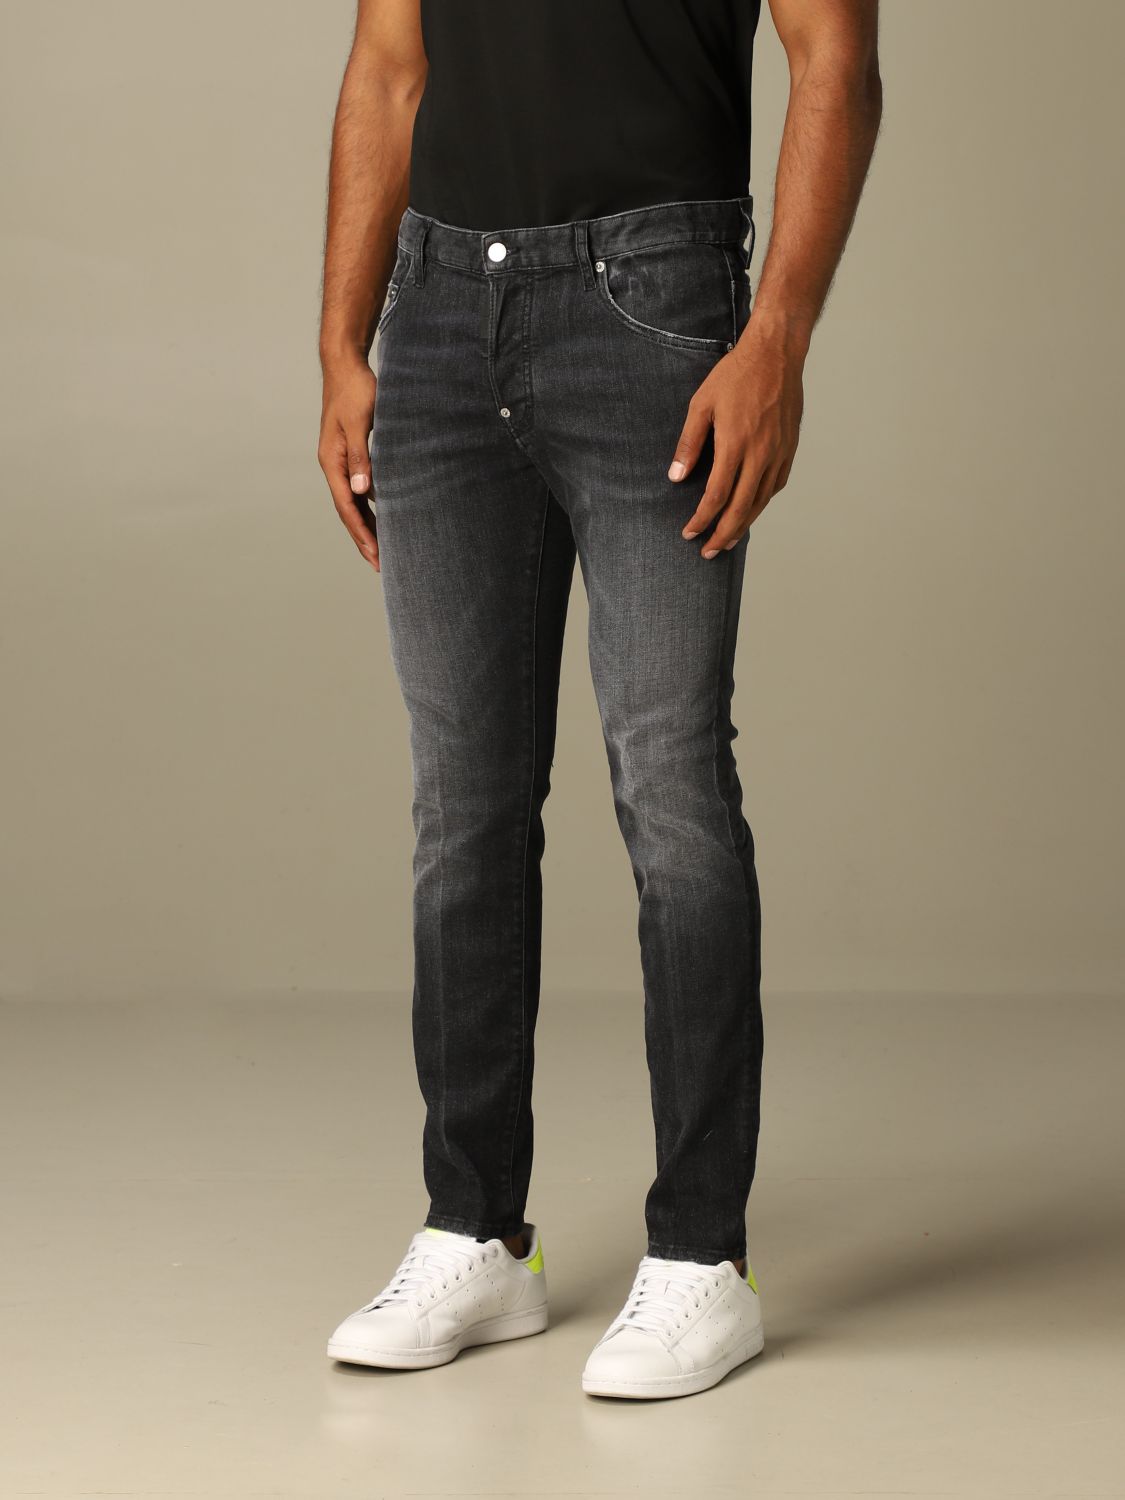 dsquared jeans black friday